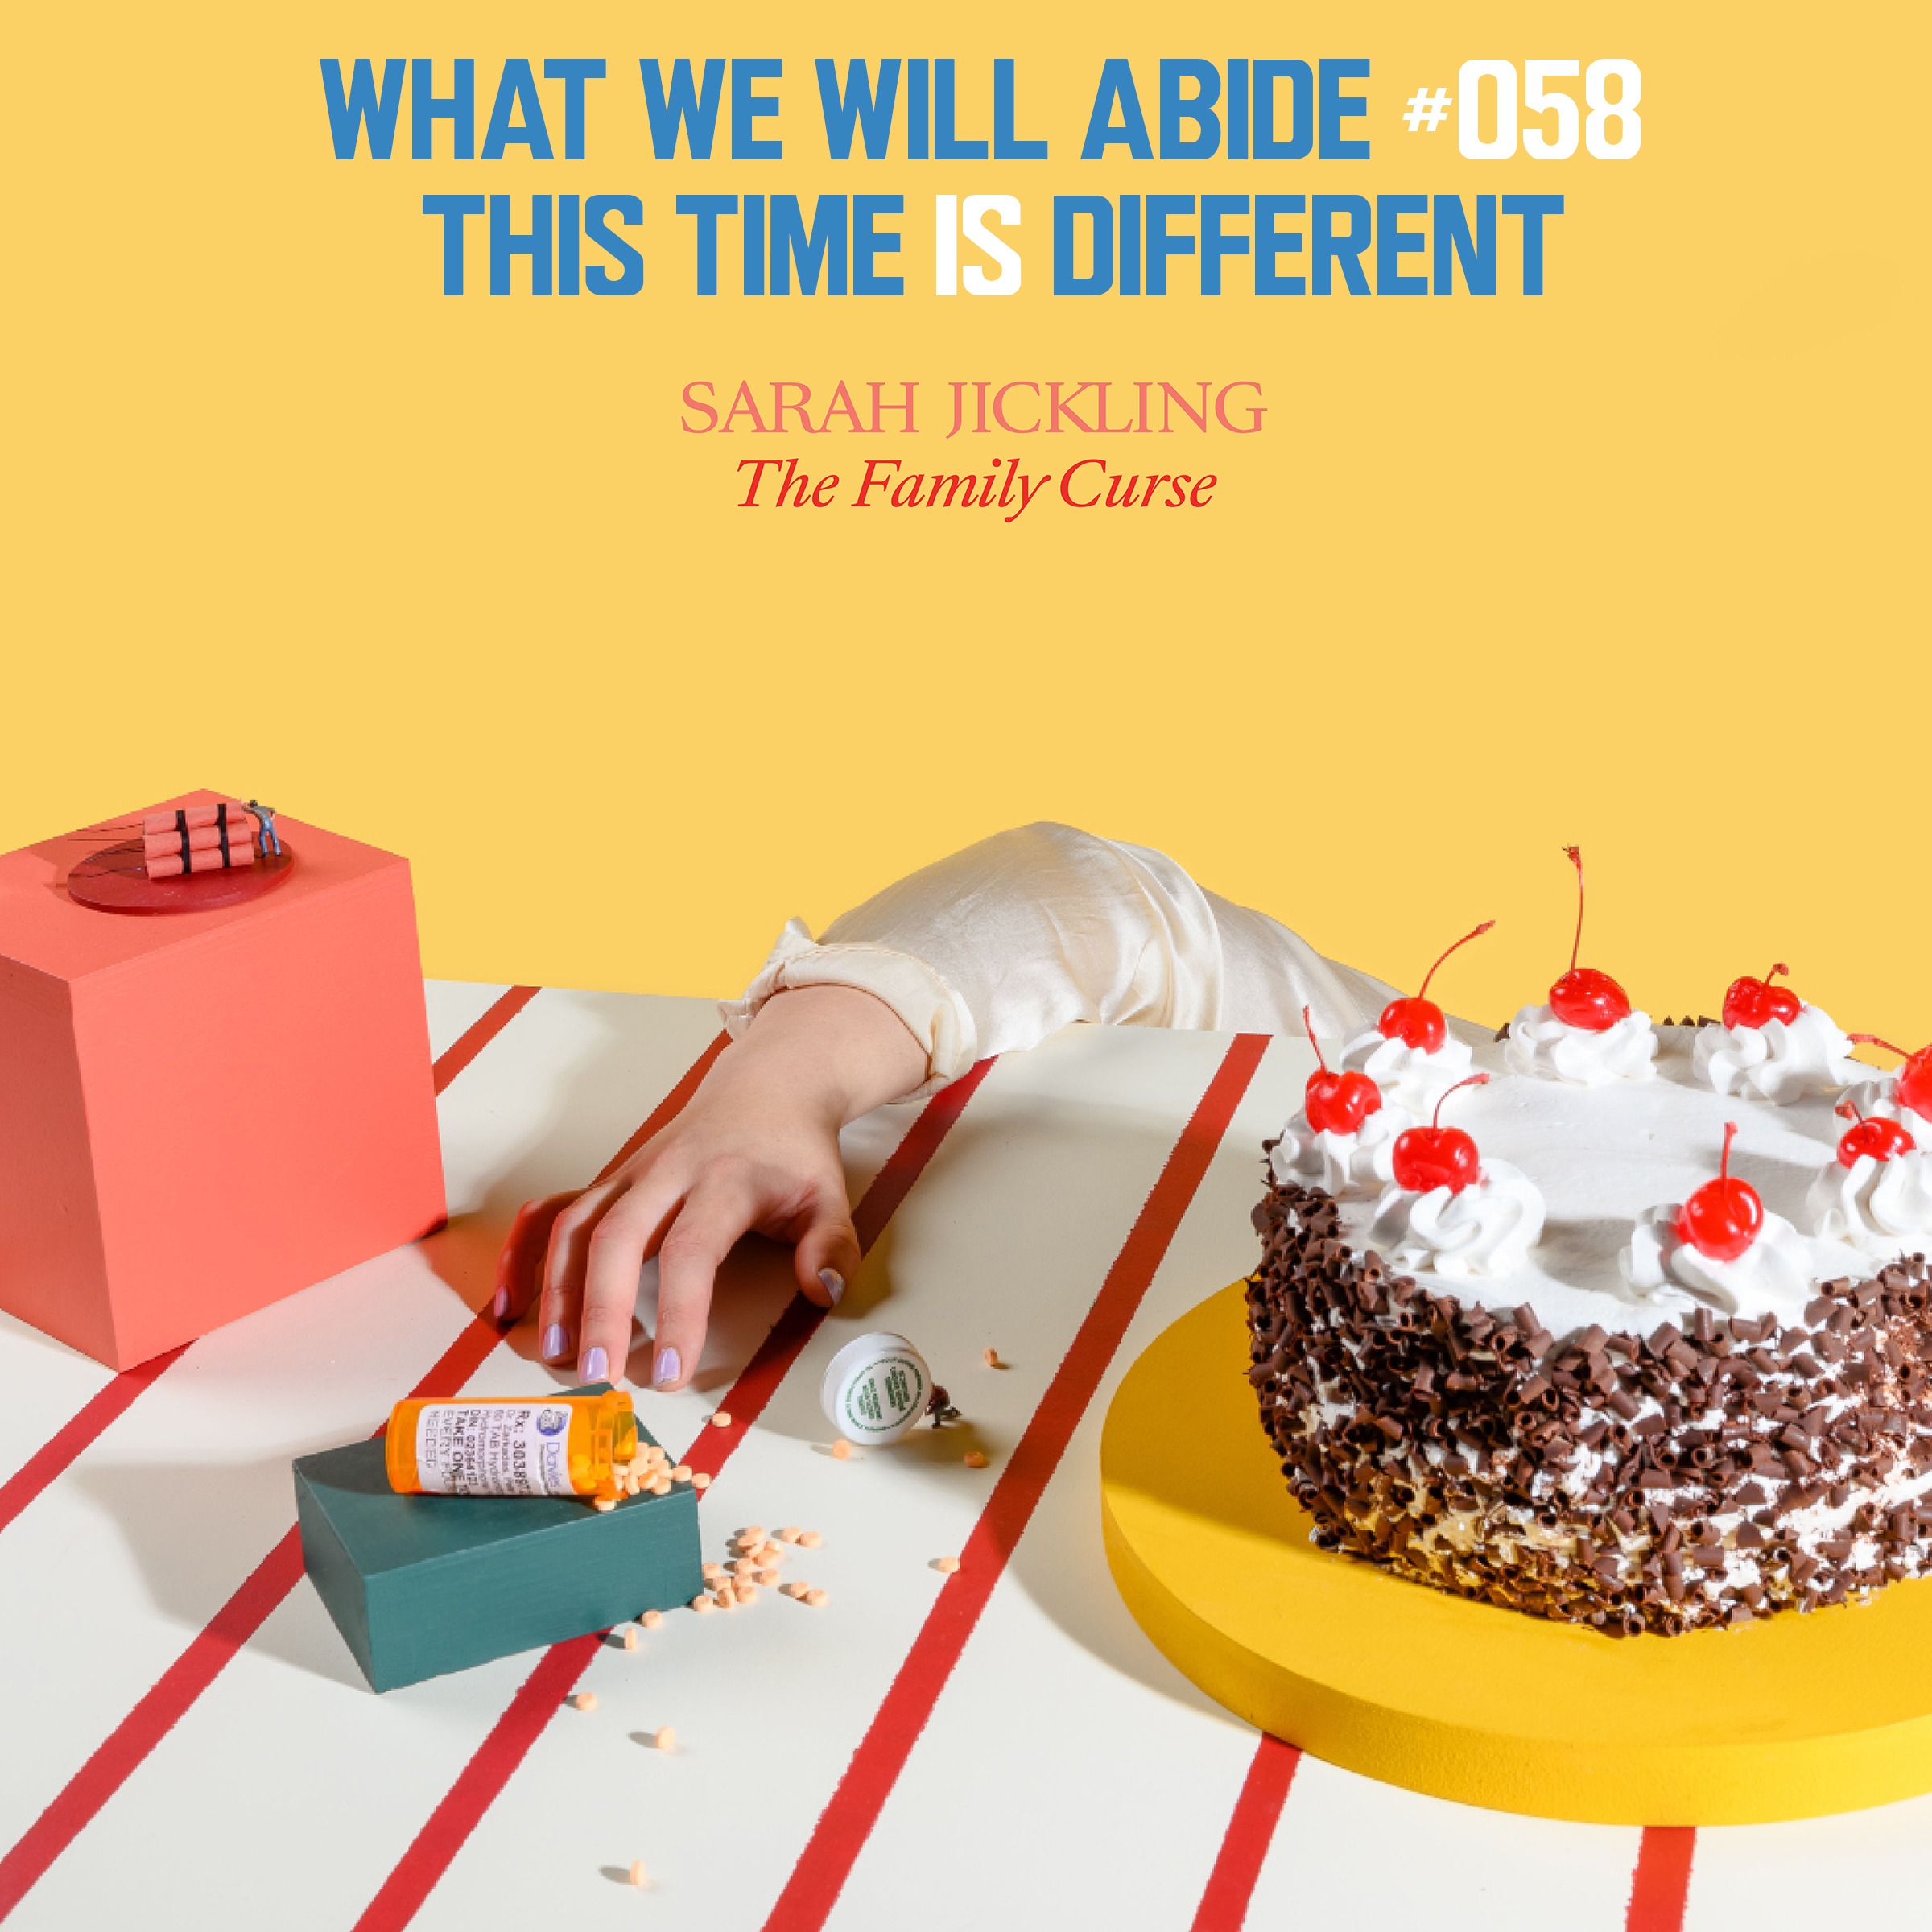 #058 - This Time is Different